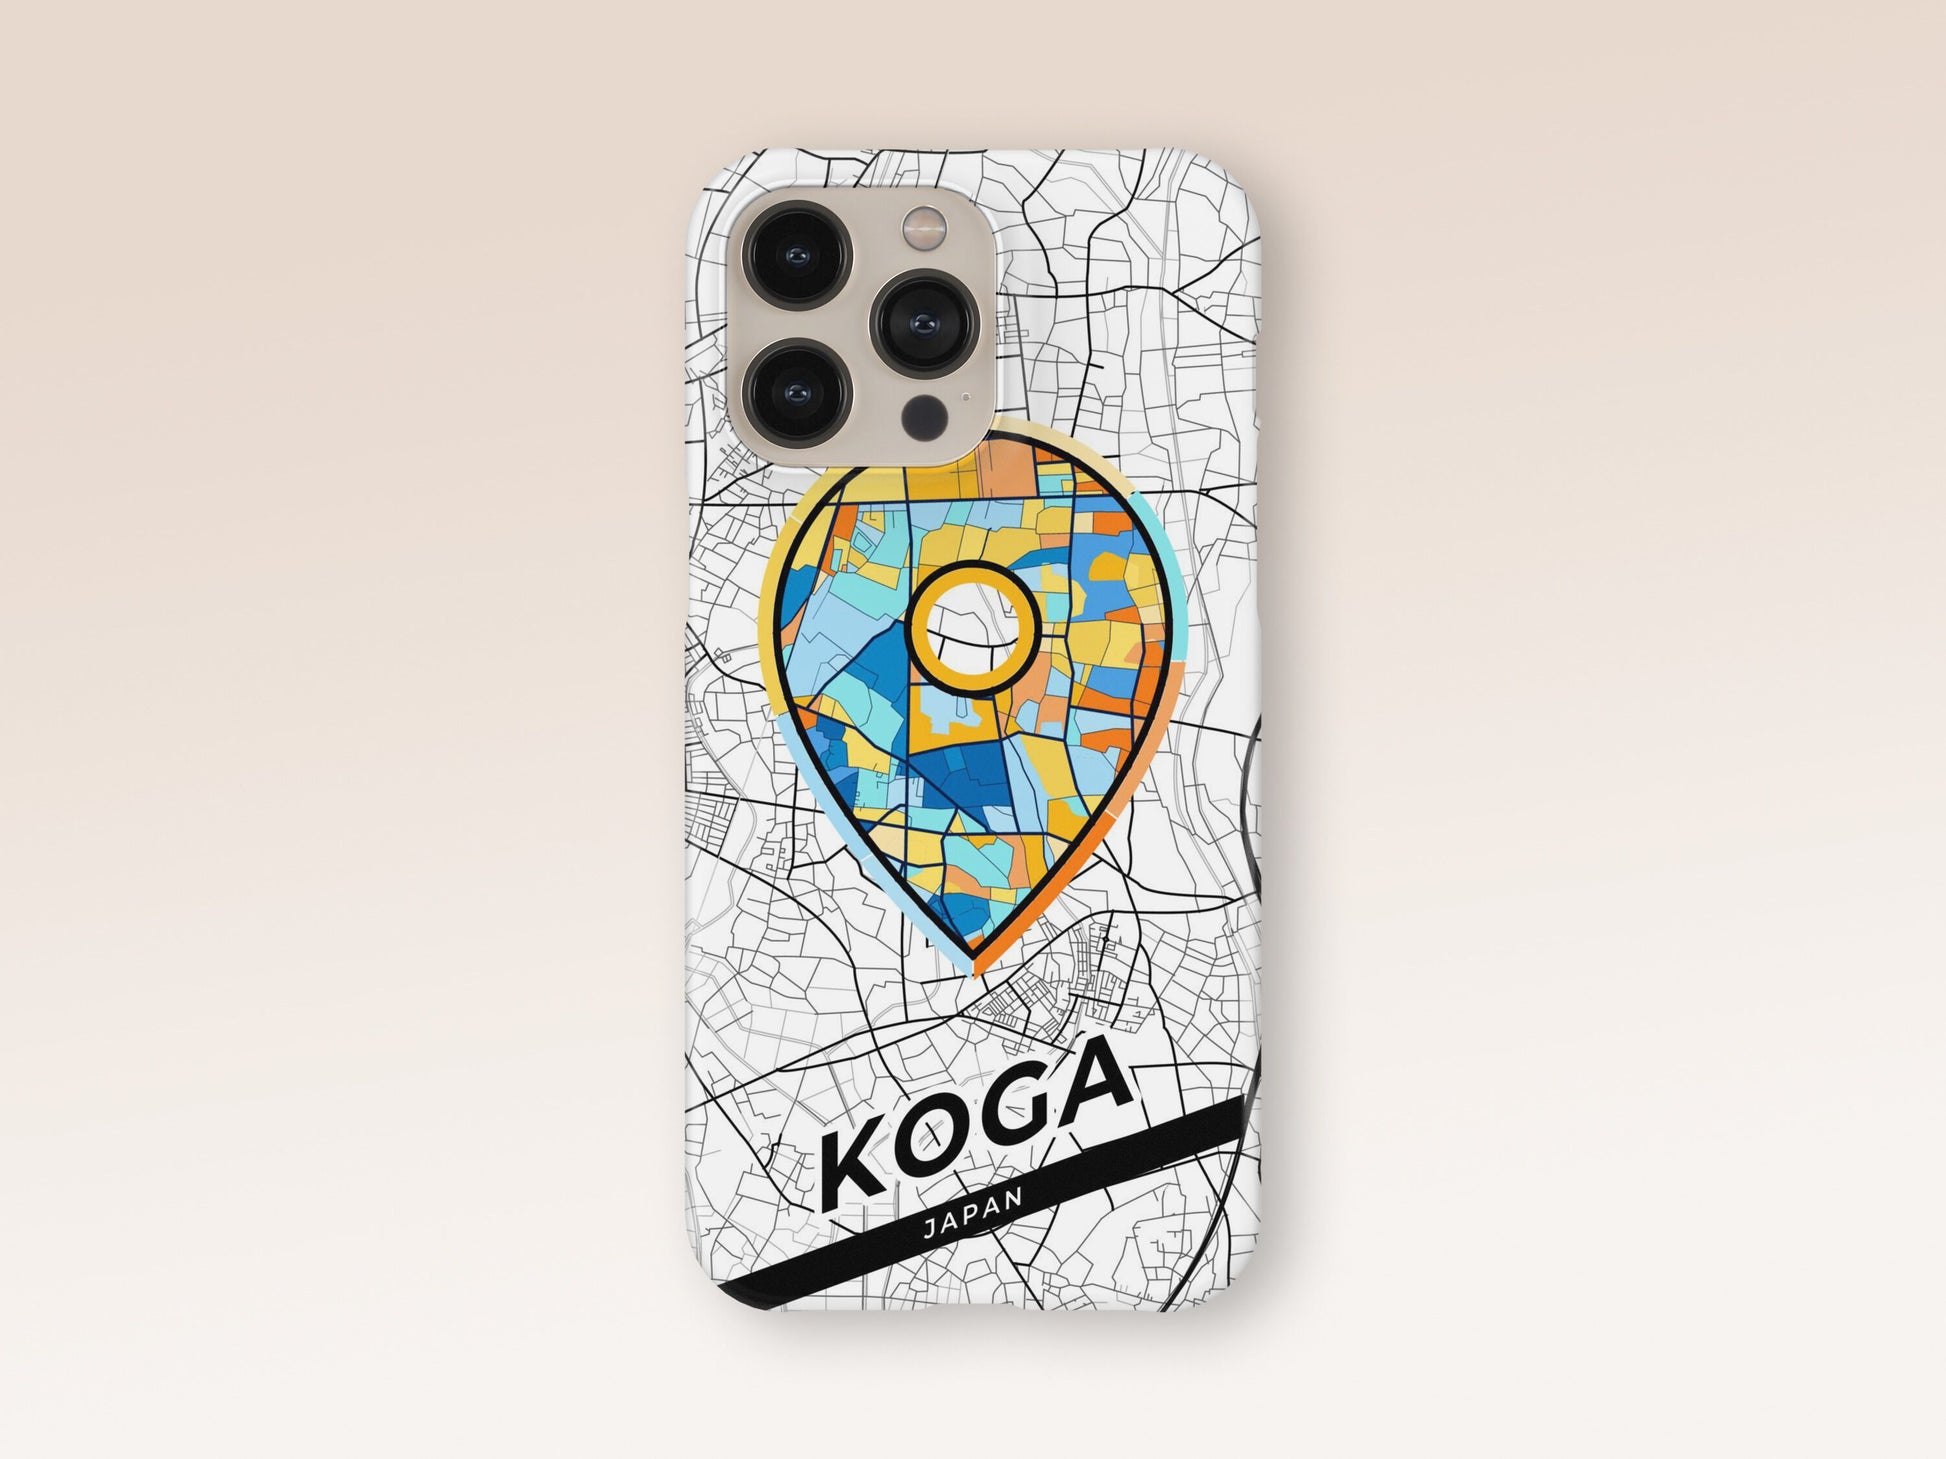 Koga Japan slim phone case with colorful icon. Birthday, wedding or housewarming gift. Couple match cases. 1